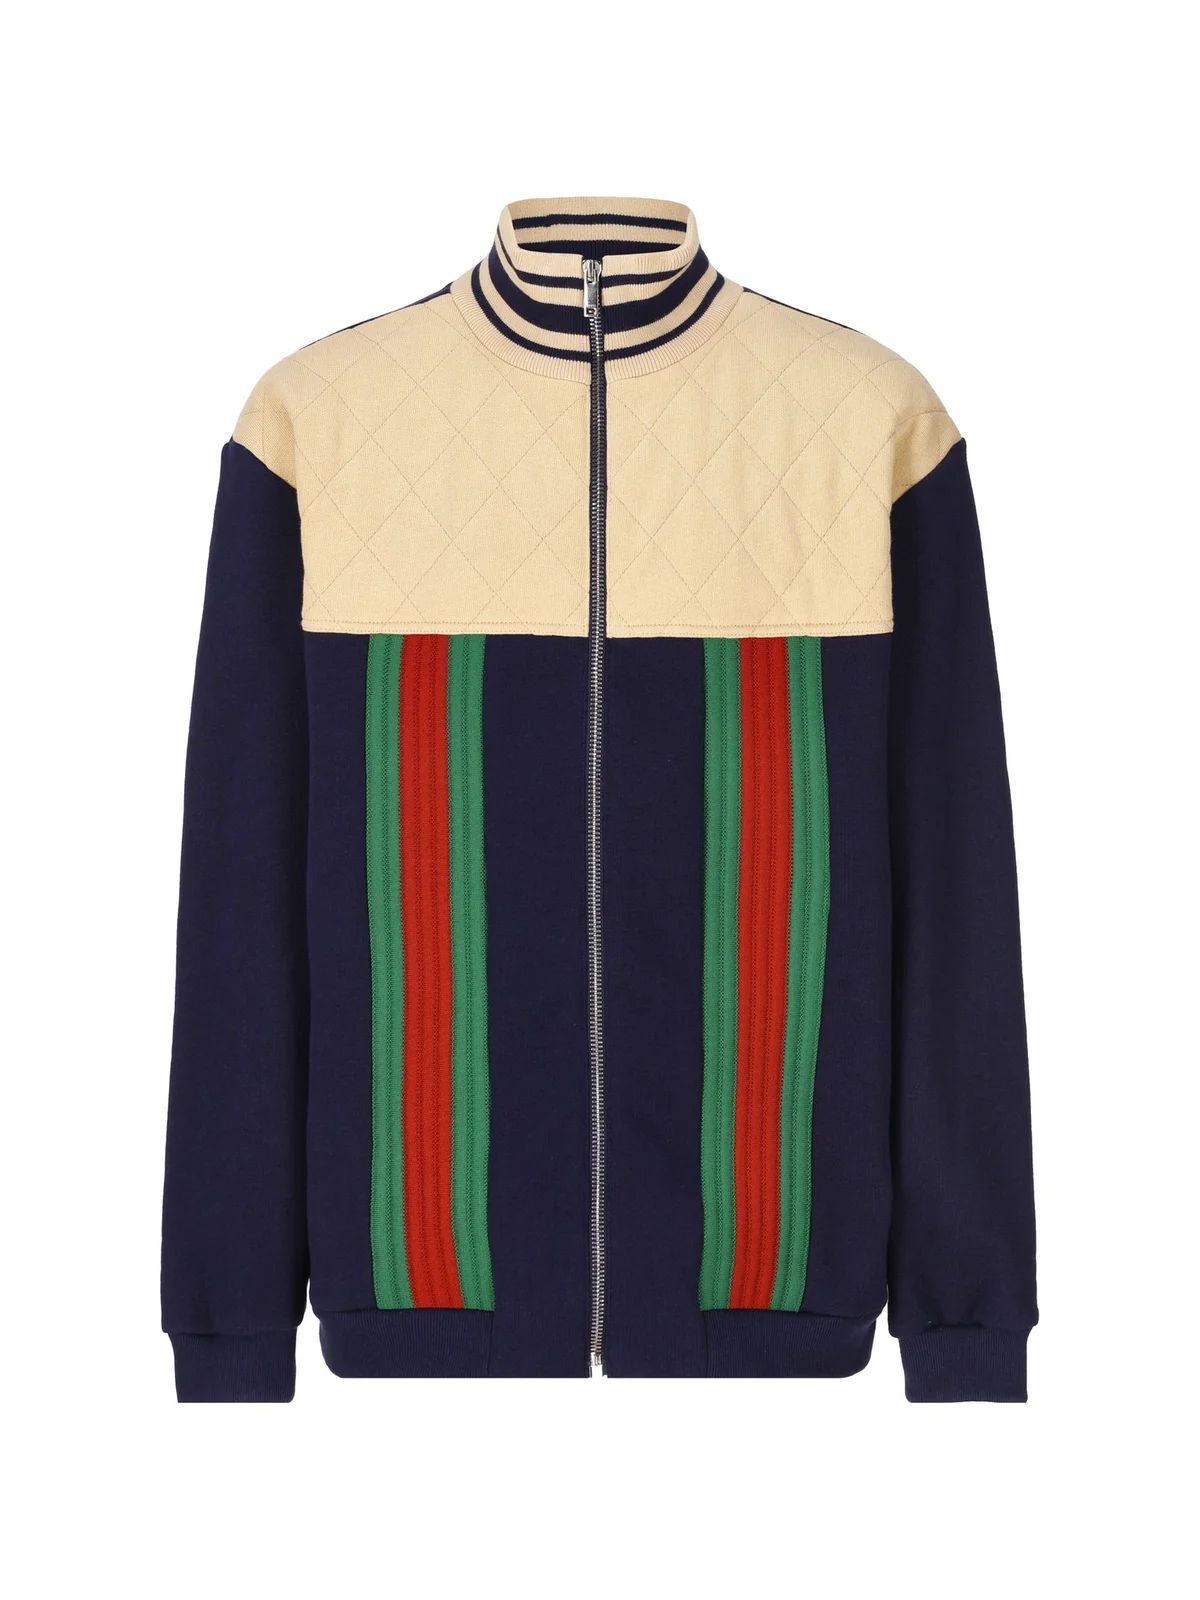 Gucci Kids Zip-Up Long-Sleeved Bomber Jacket | Cettire Global